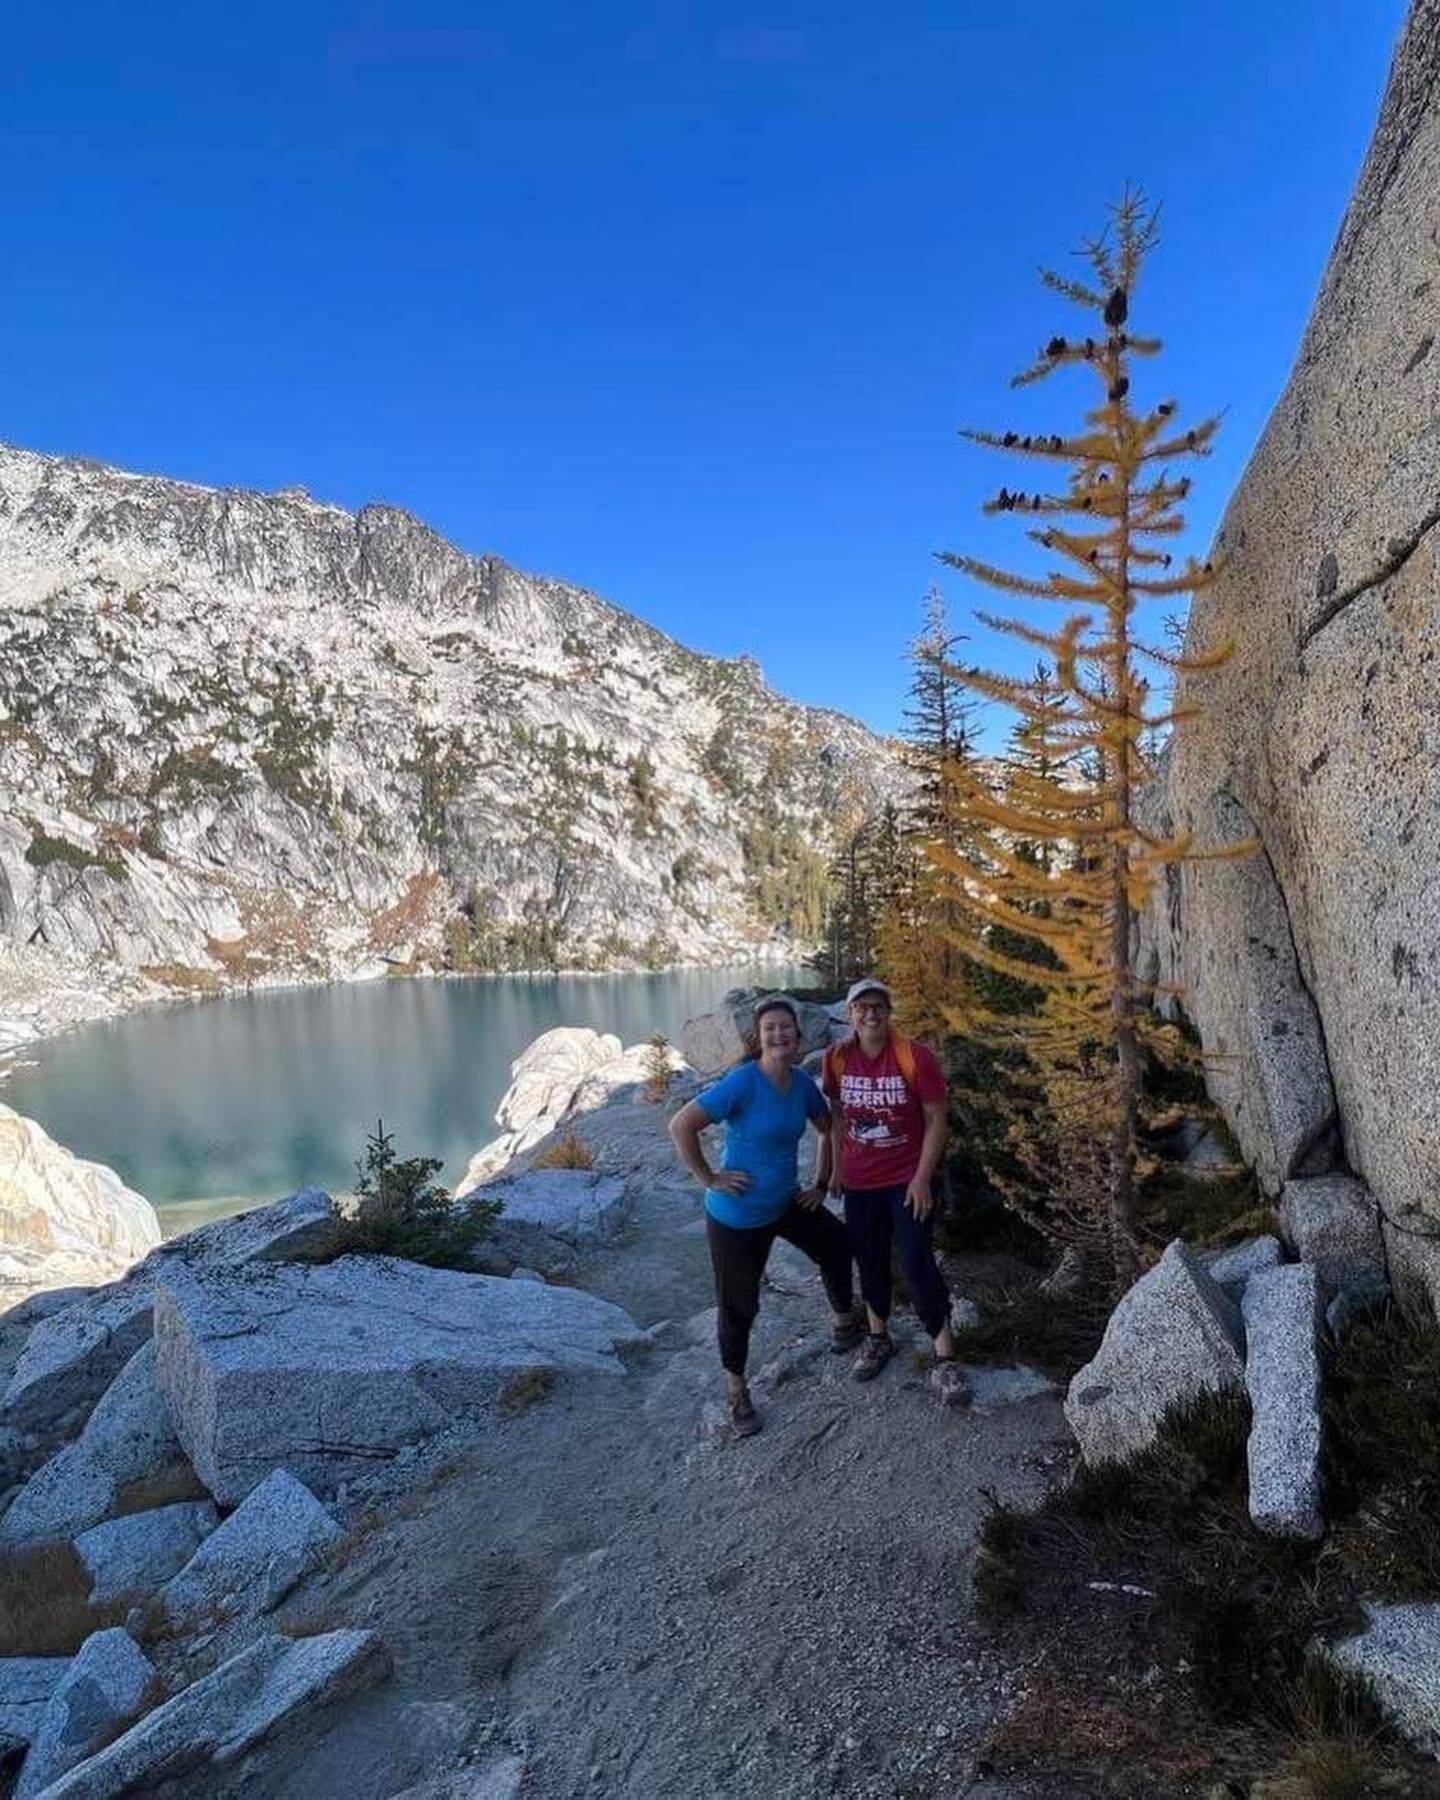 Photo provided
Heidi Mayne, right, hikes the Enchantments with her friend Ellisha Kempton two days after receiving her breast cancer diagnosis.